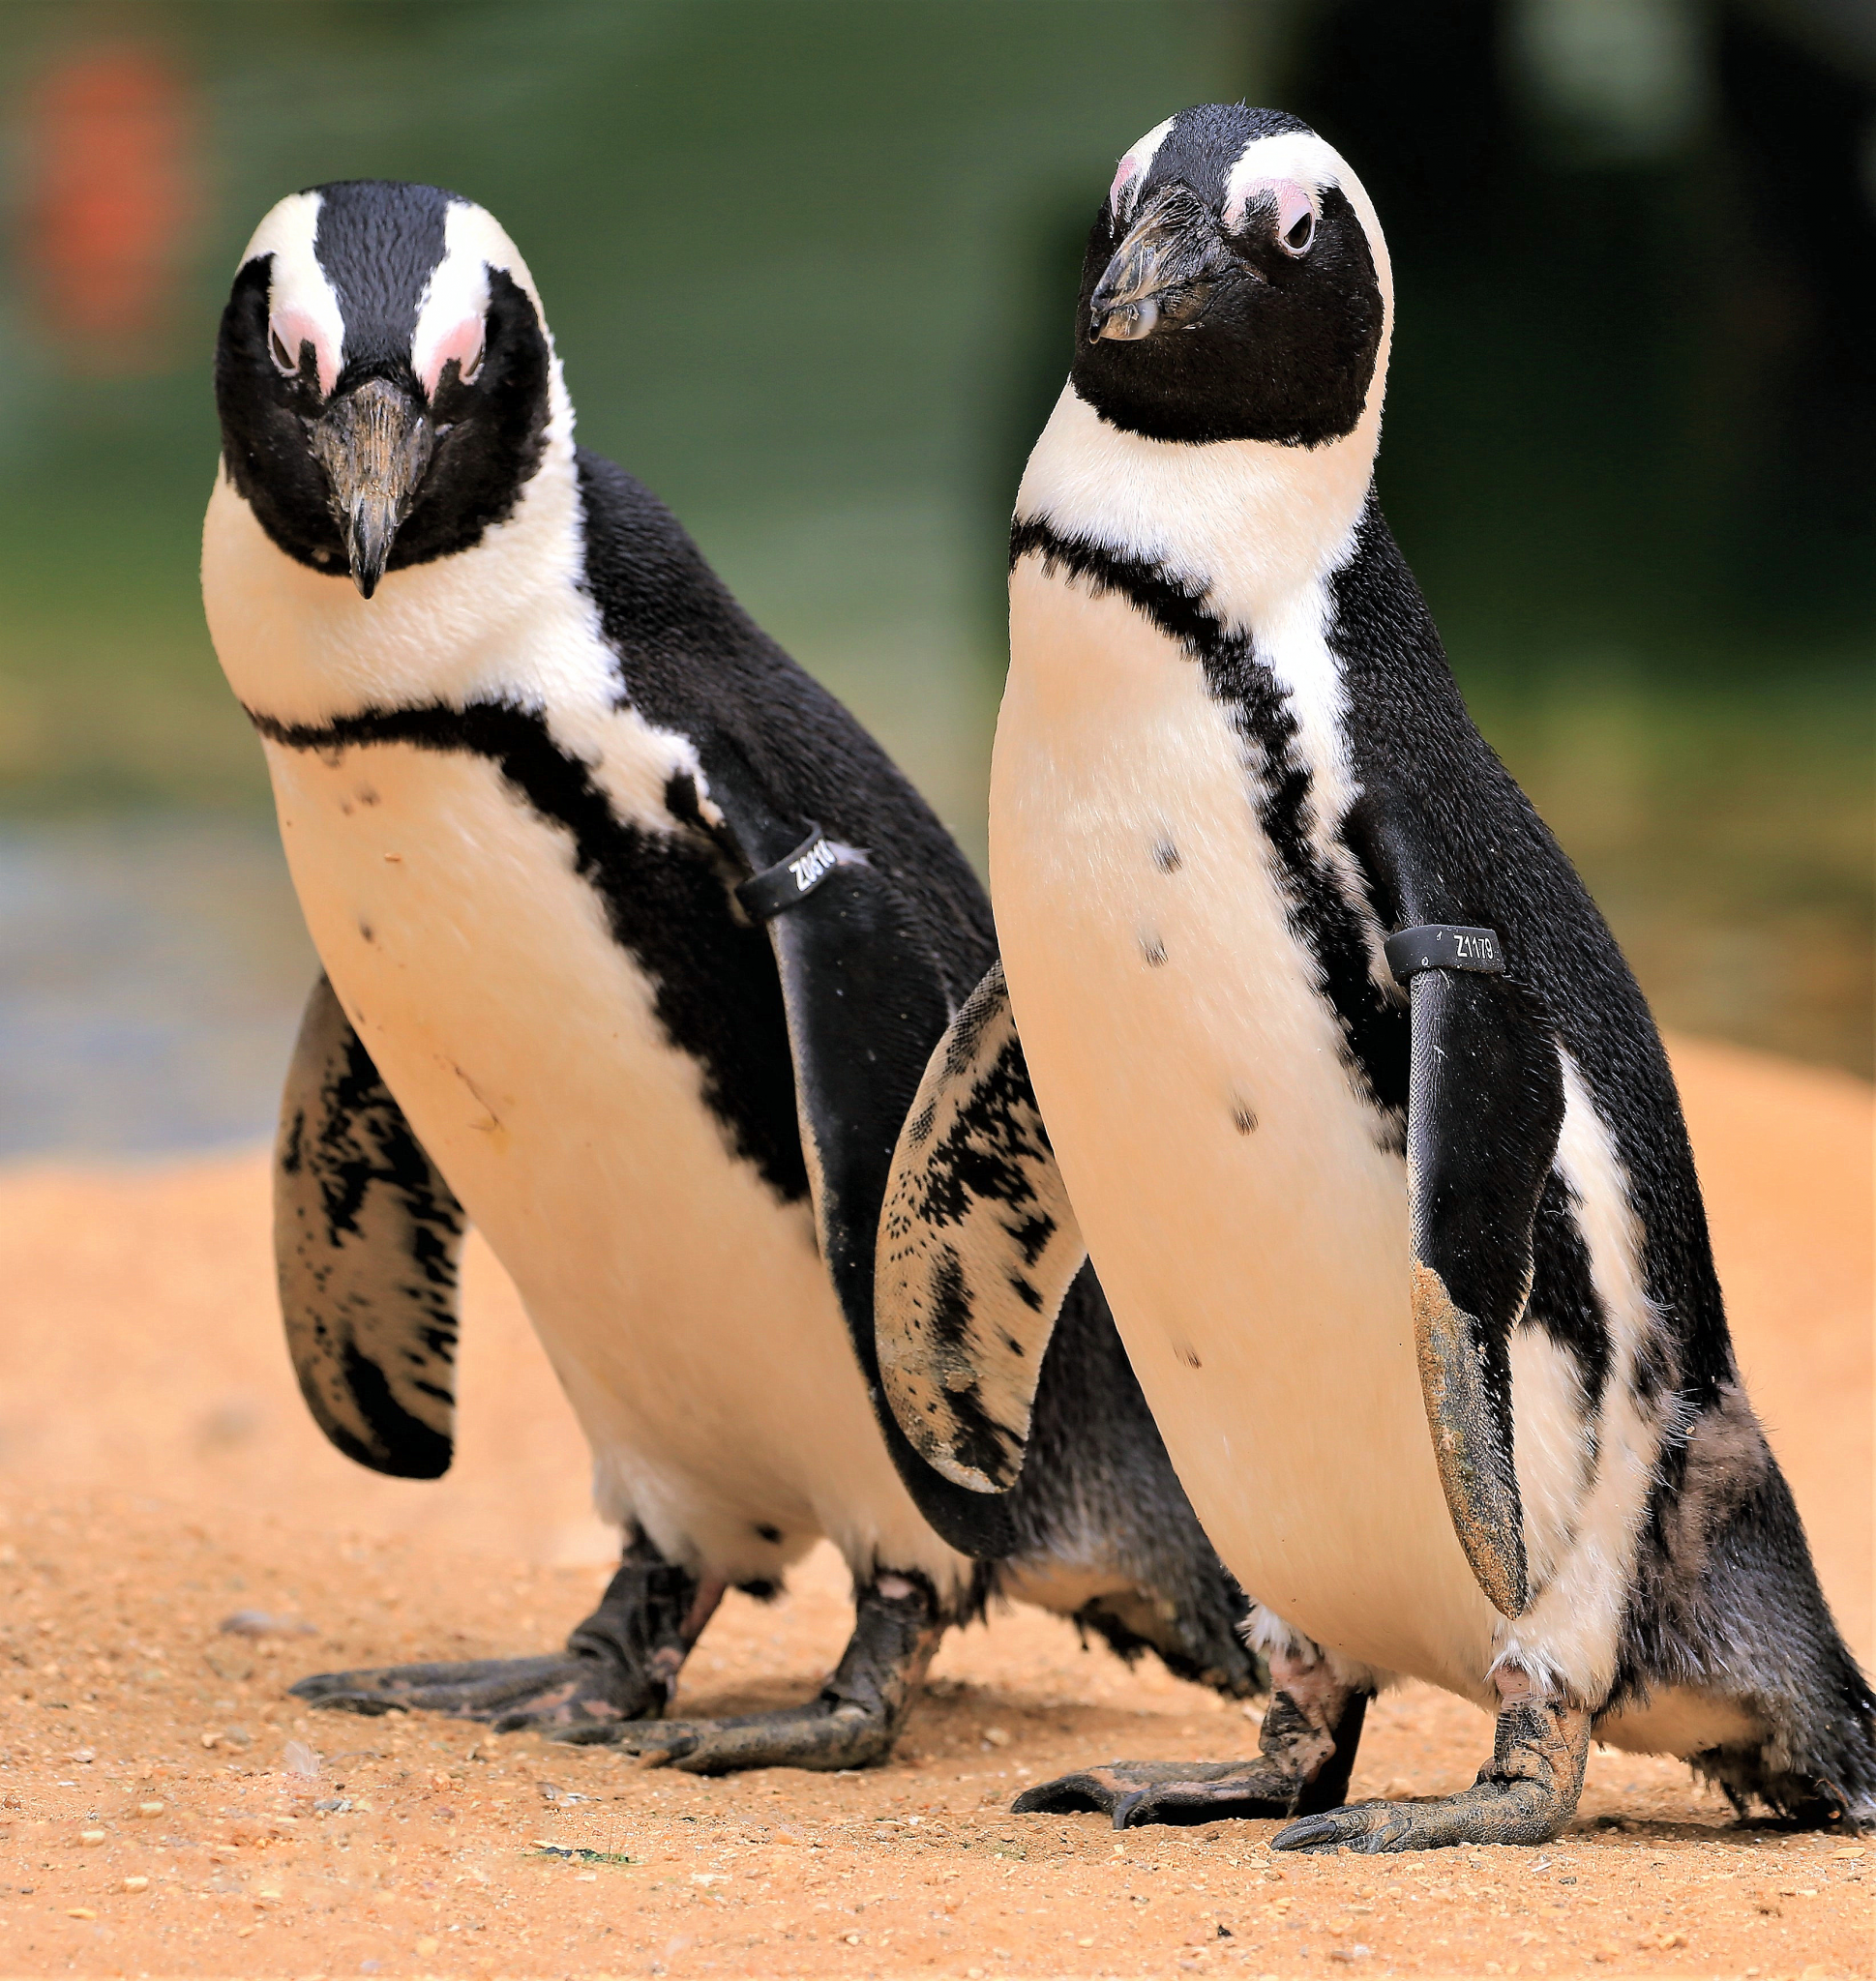 Two penguins are stood together.